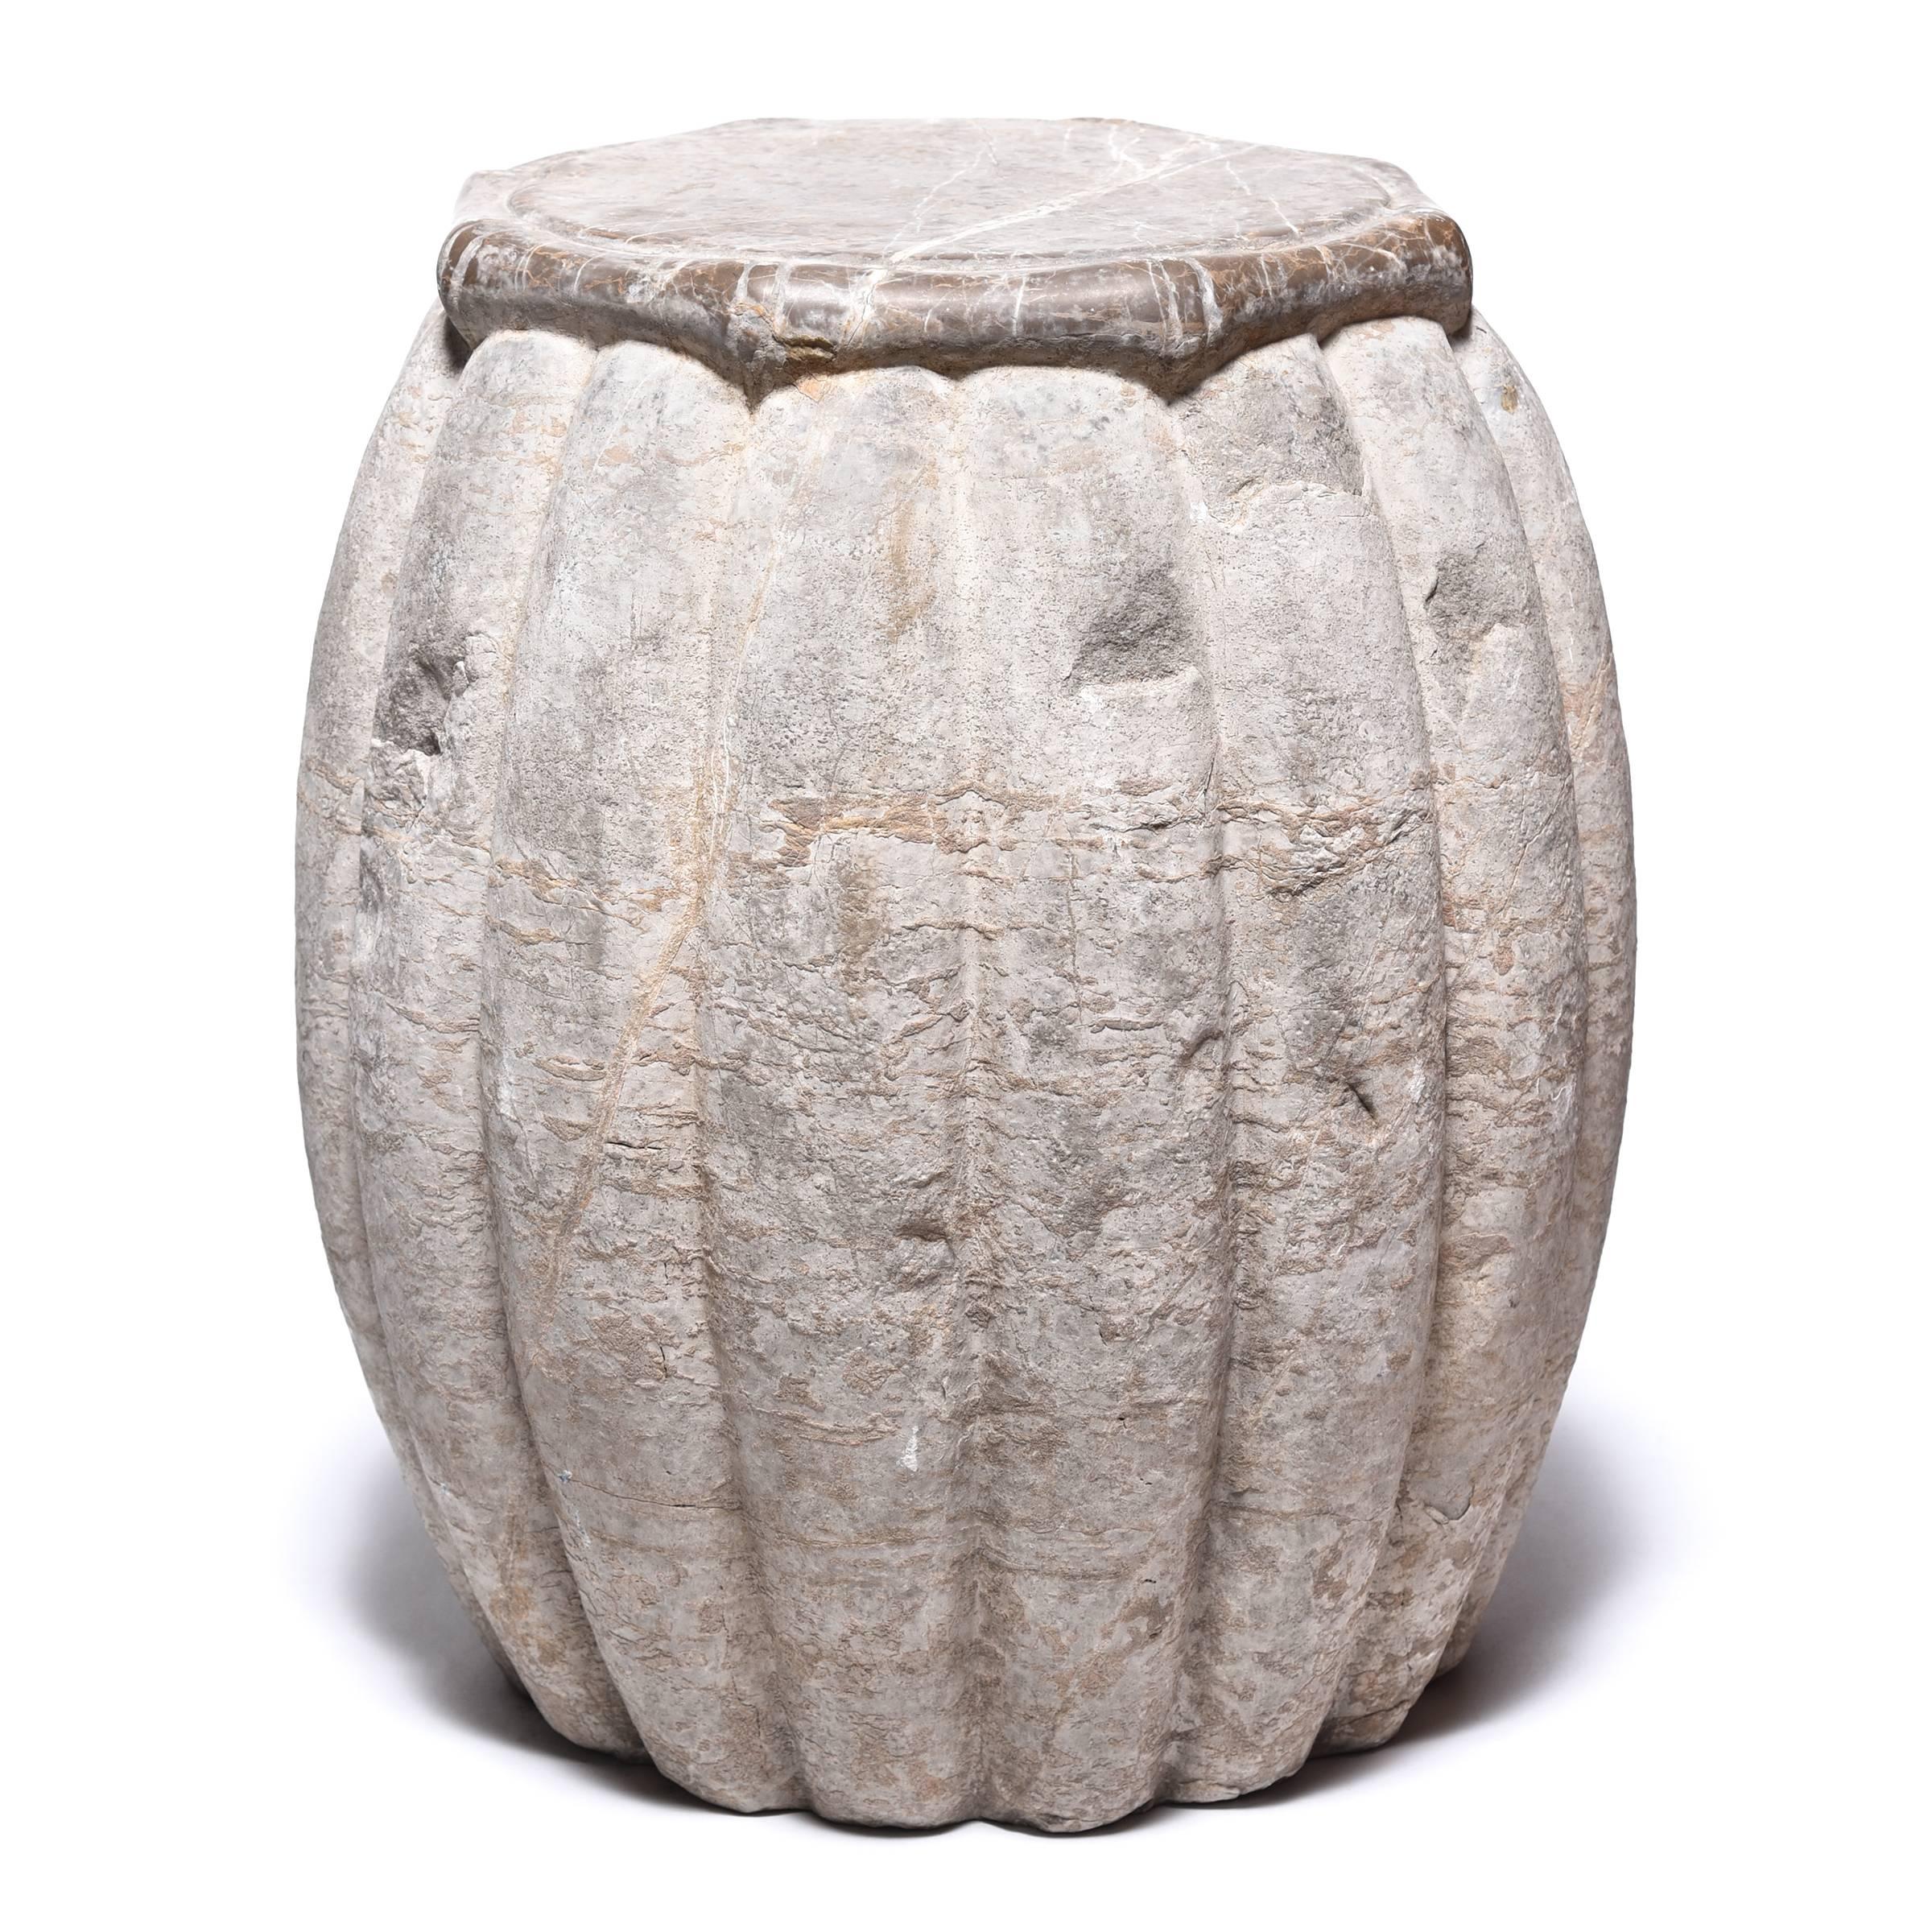 Hand-carved from limestone, this drum-shaped stool swells a ribbed melon shape, an ancient symbol of fertility. A smooth top with bamboo-like trim juxtaposes nicely with the drum’s organic grain and markings, while providing a level surface. We love